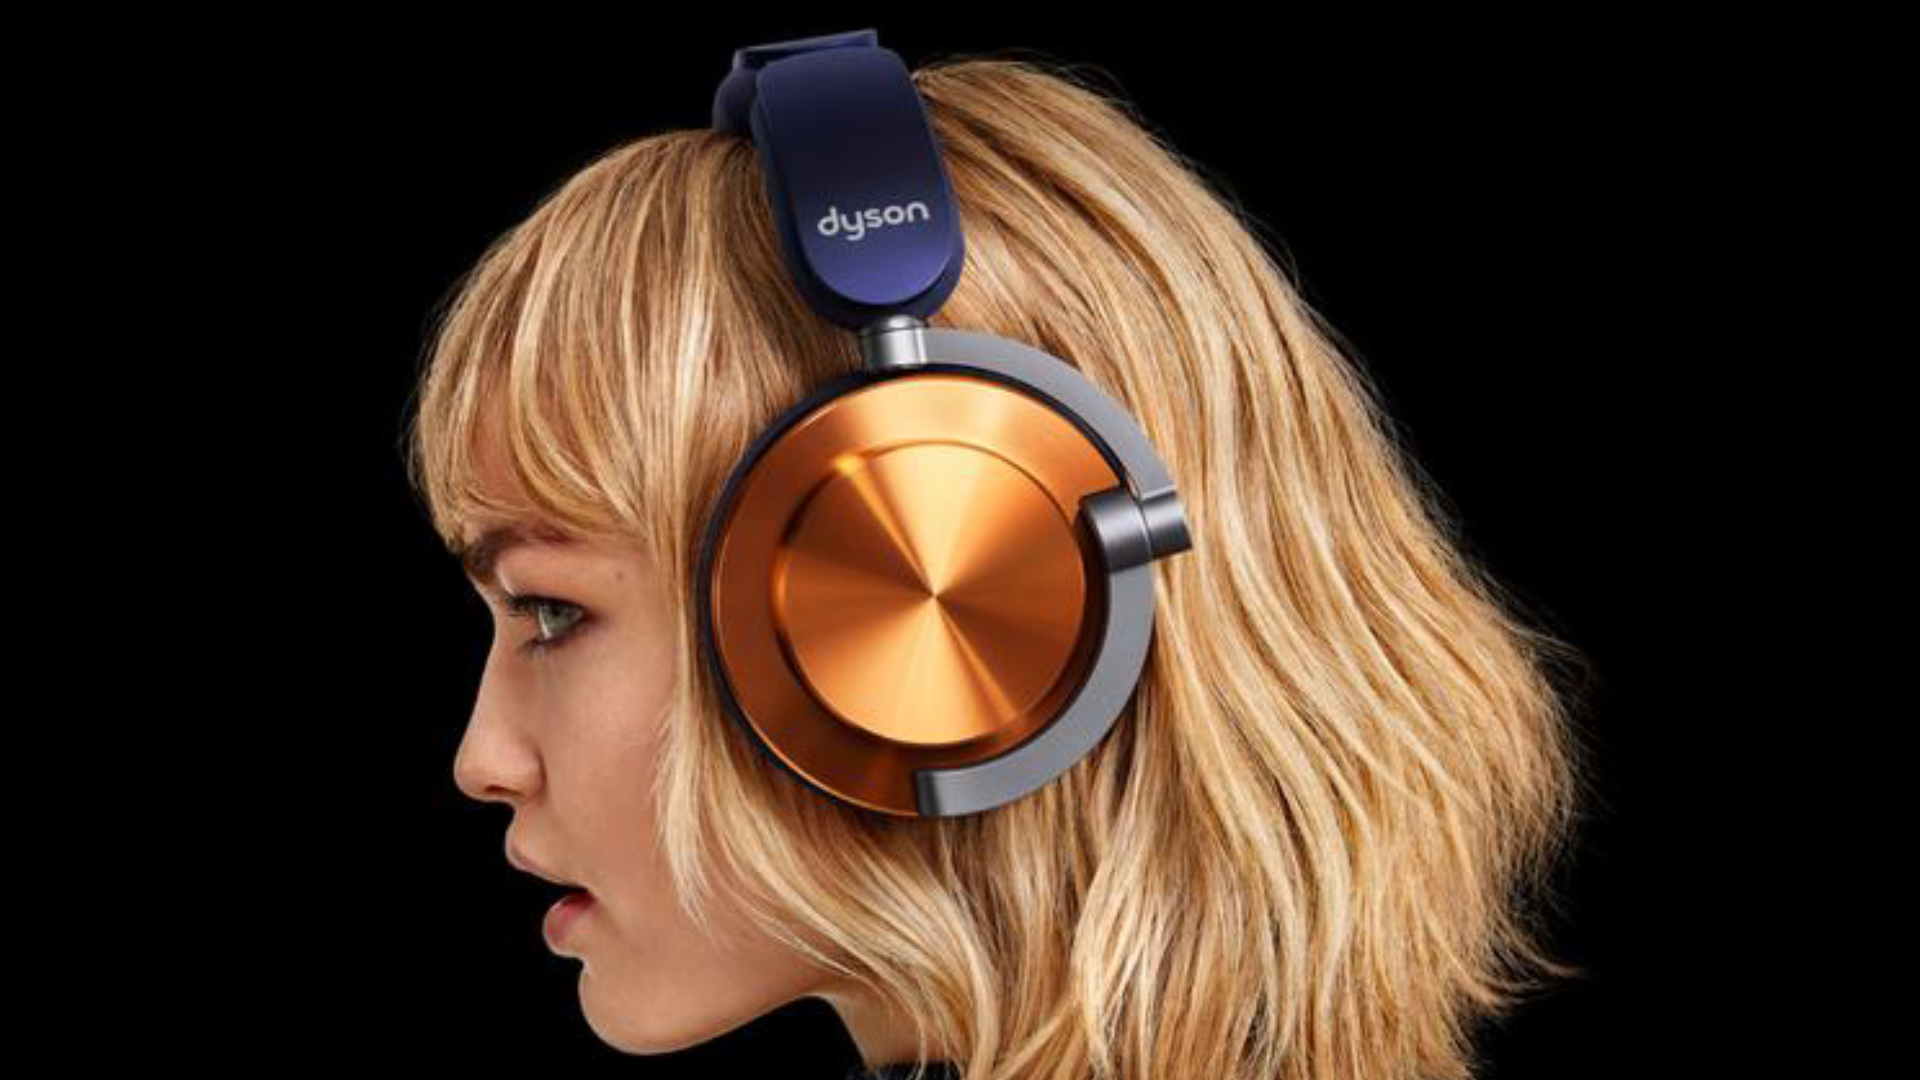  Dyson's humongous ANC headphones look great for Princess Leia impressions from the side, but from the front, I'm not convinced 